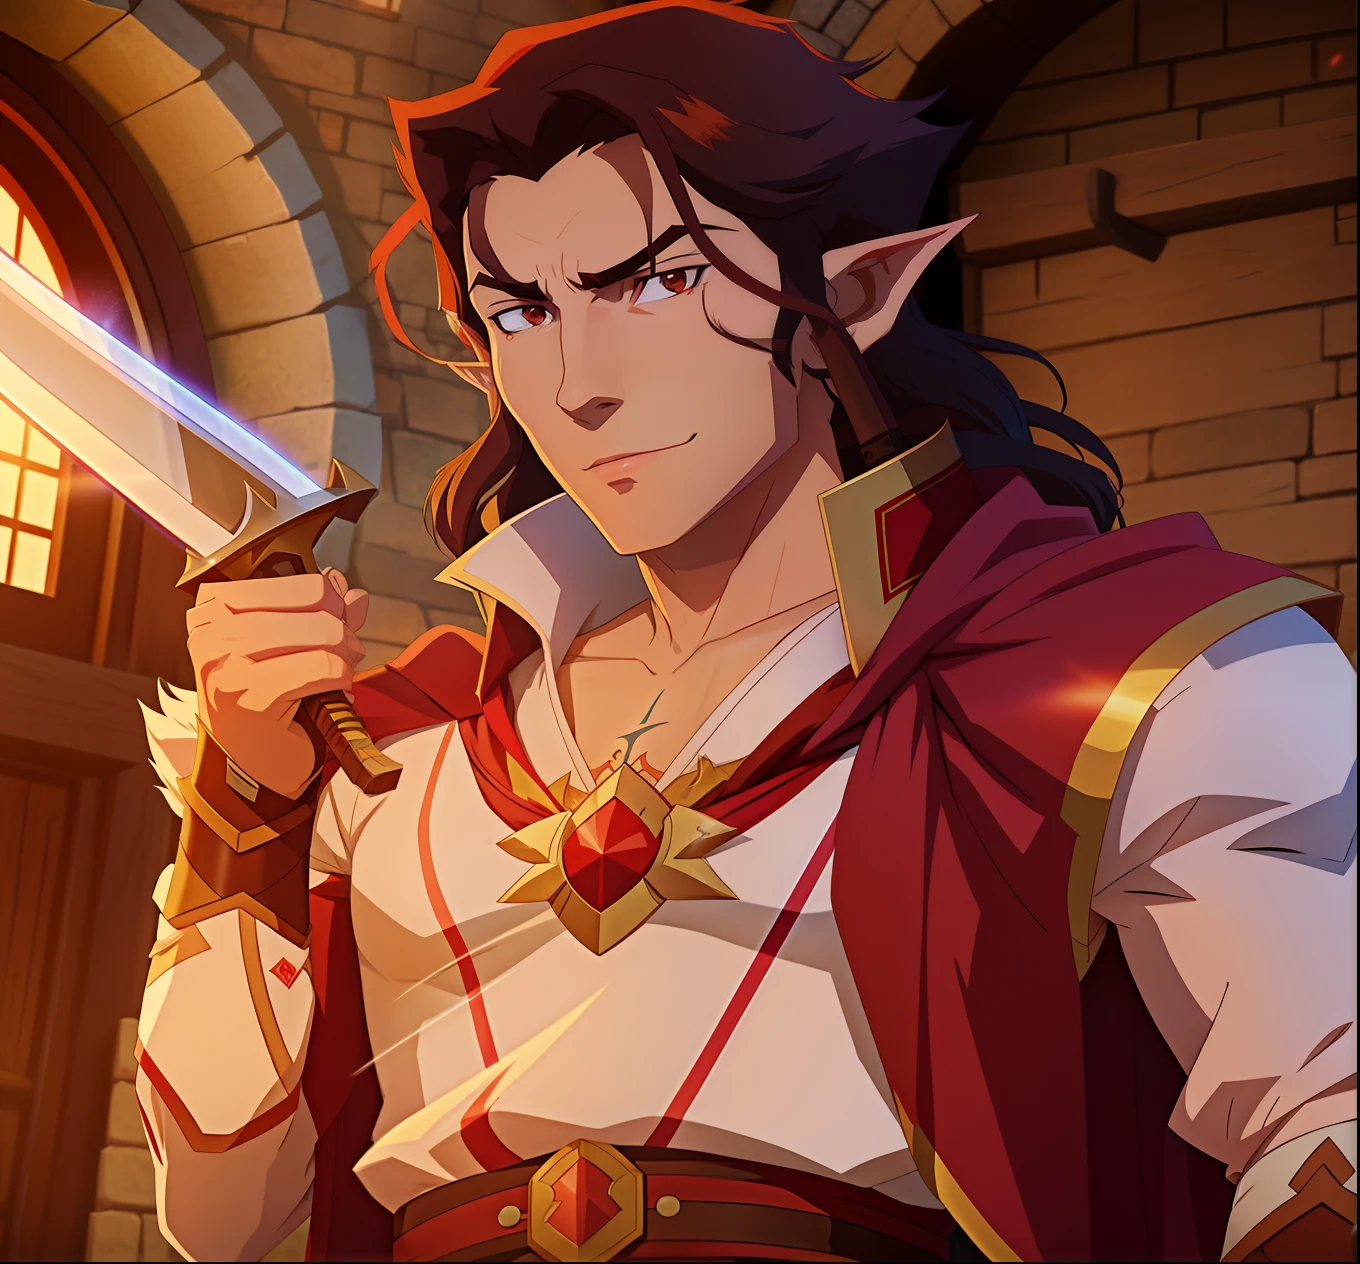 anime character with sword in hand and a red cape on,a cute shaved young aragorn in an anime world, a male elf, arcane from netflix, picture of a male cleric, smirking male bard, official art, handsome young, casimir art, a portrait of a male elf, in the anime film.